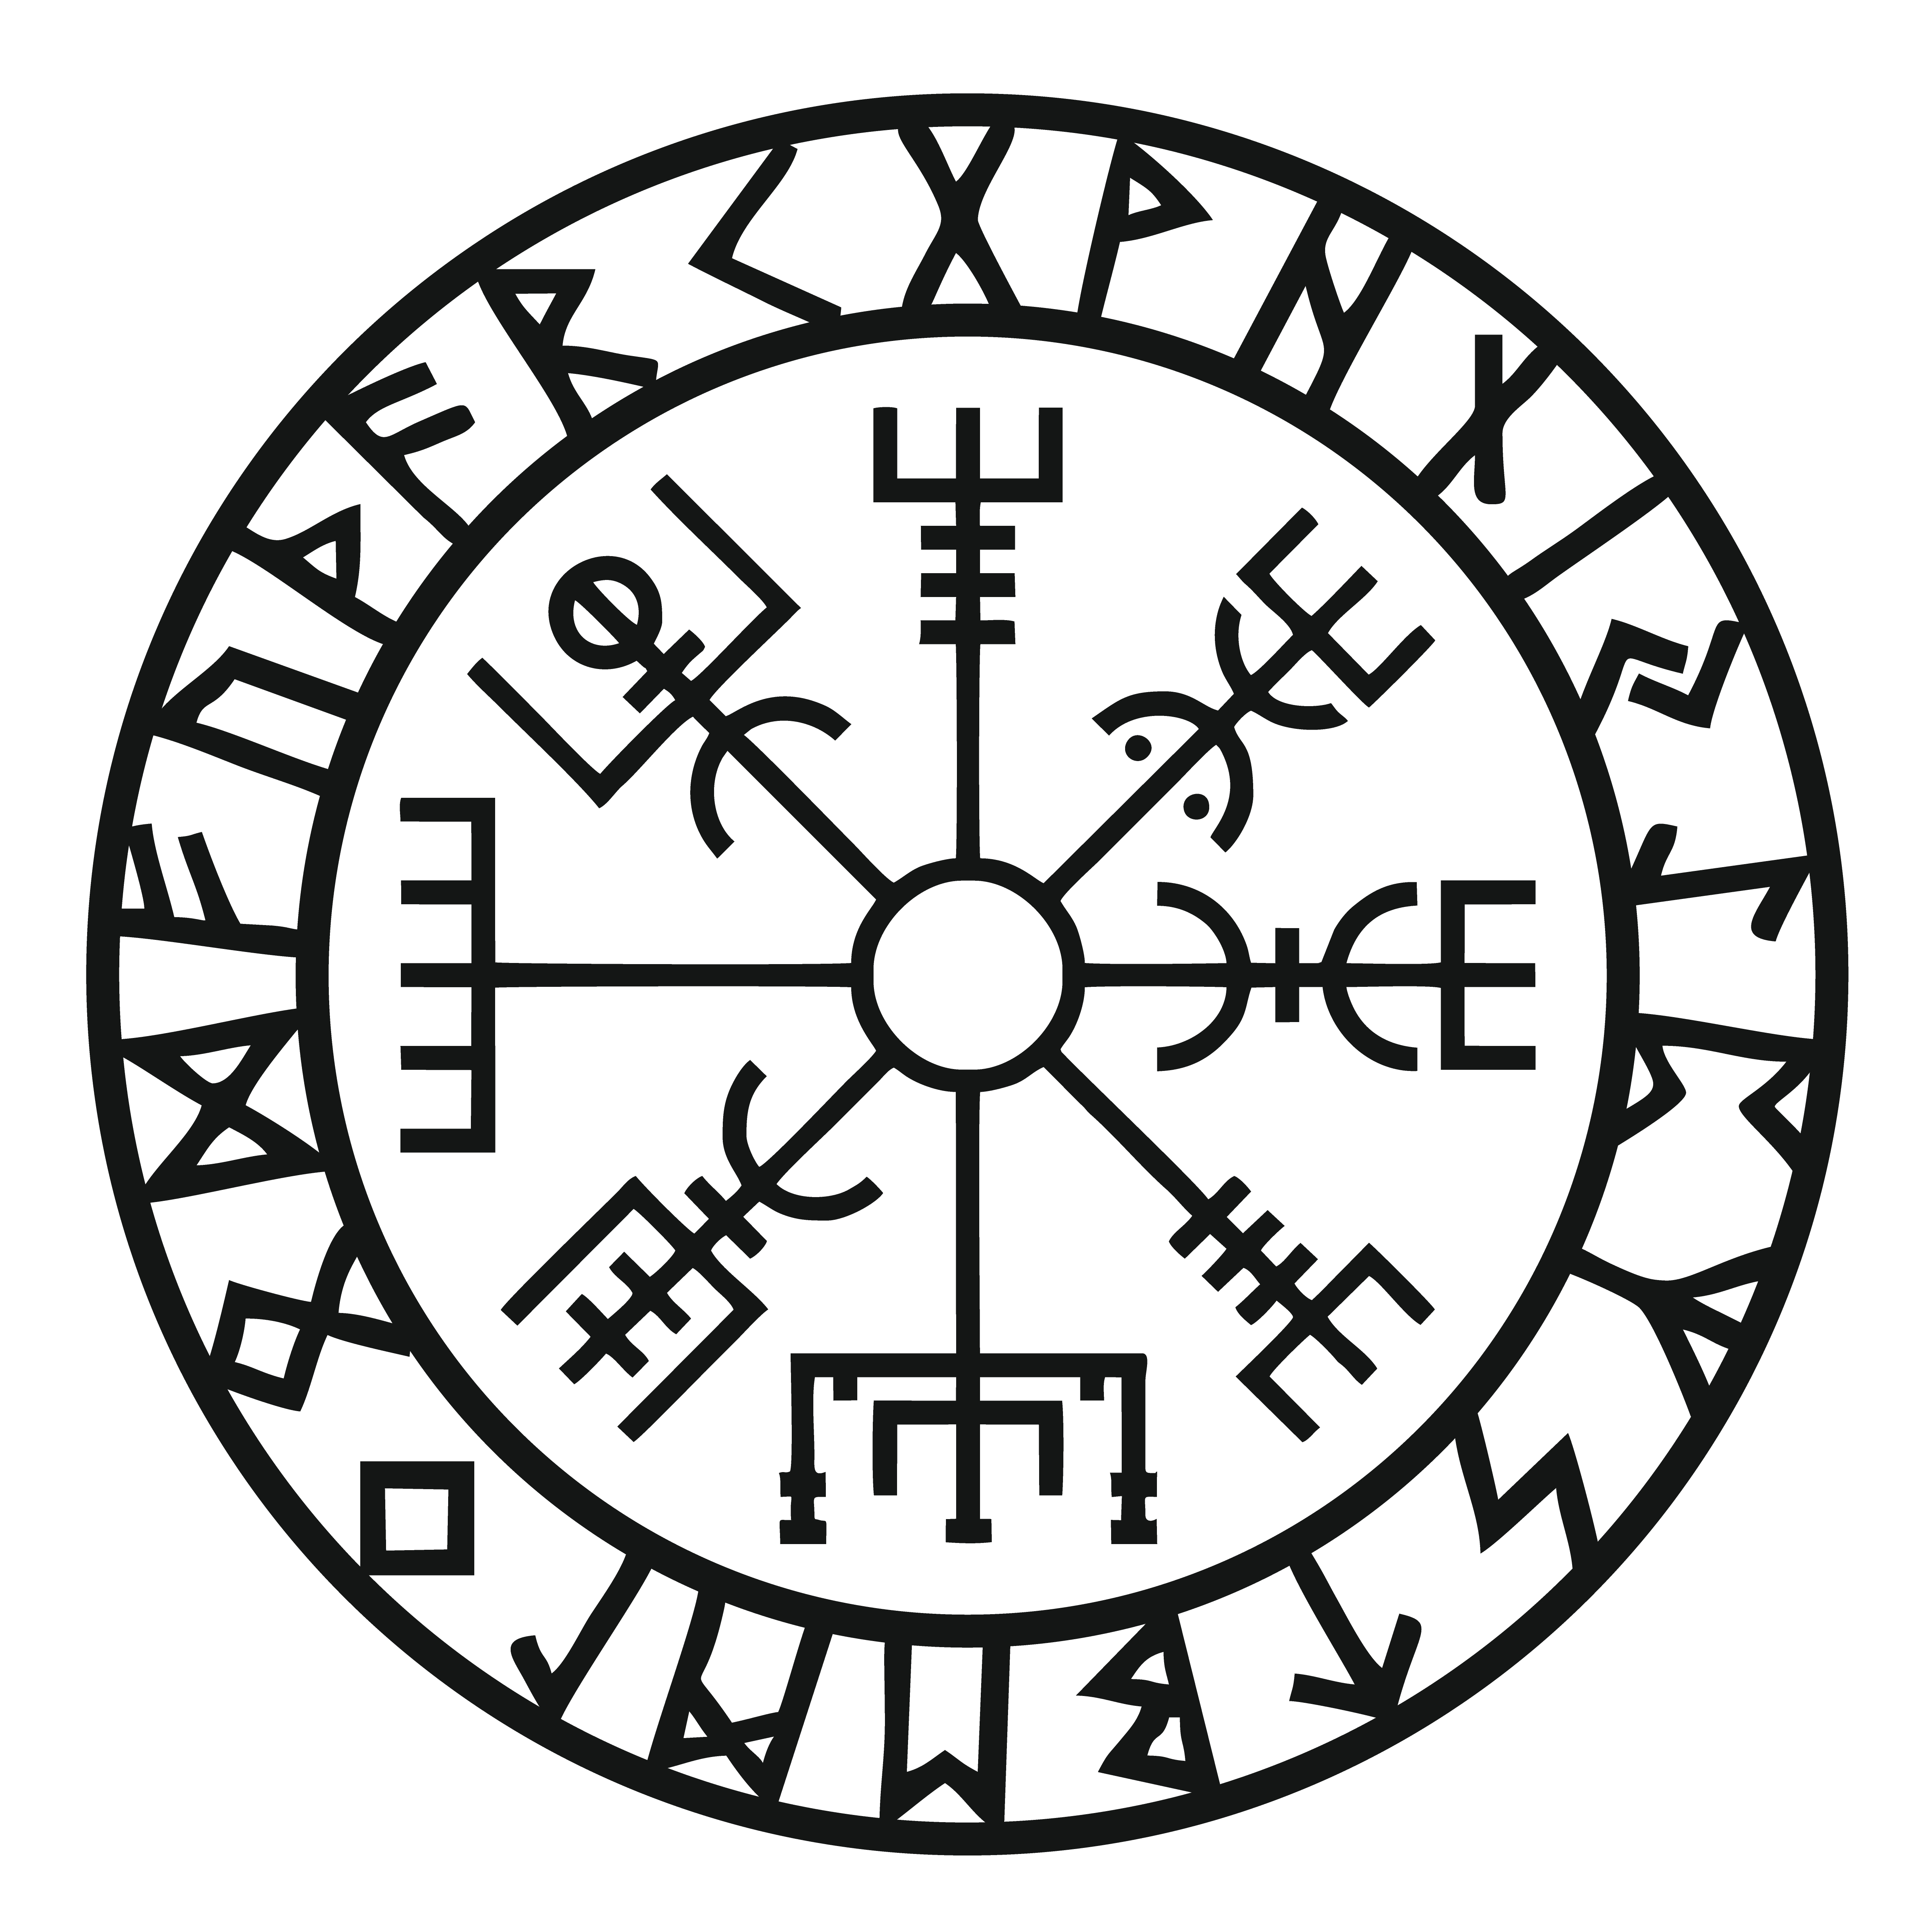 Vegvisir-Viking-Symbol-of-Protection-and-Guidance-The-Runic-Viking-Compass.jpg